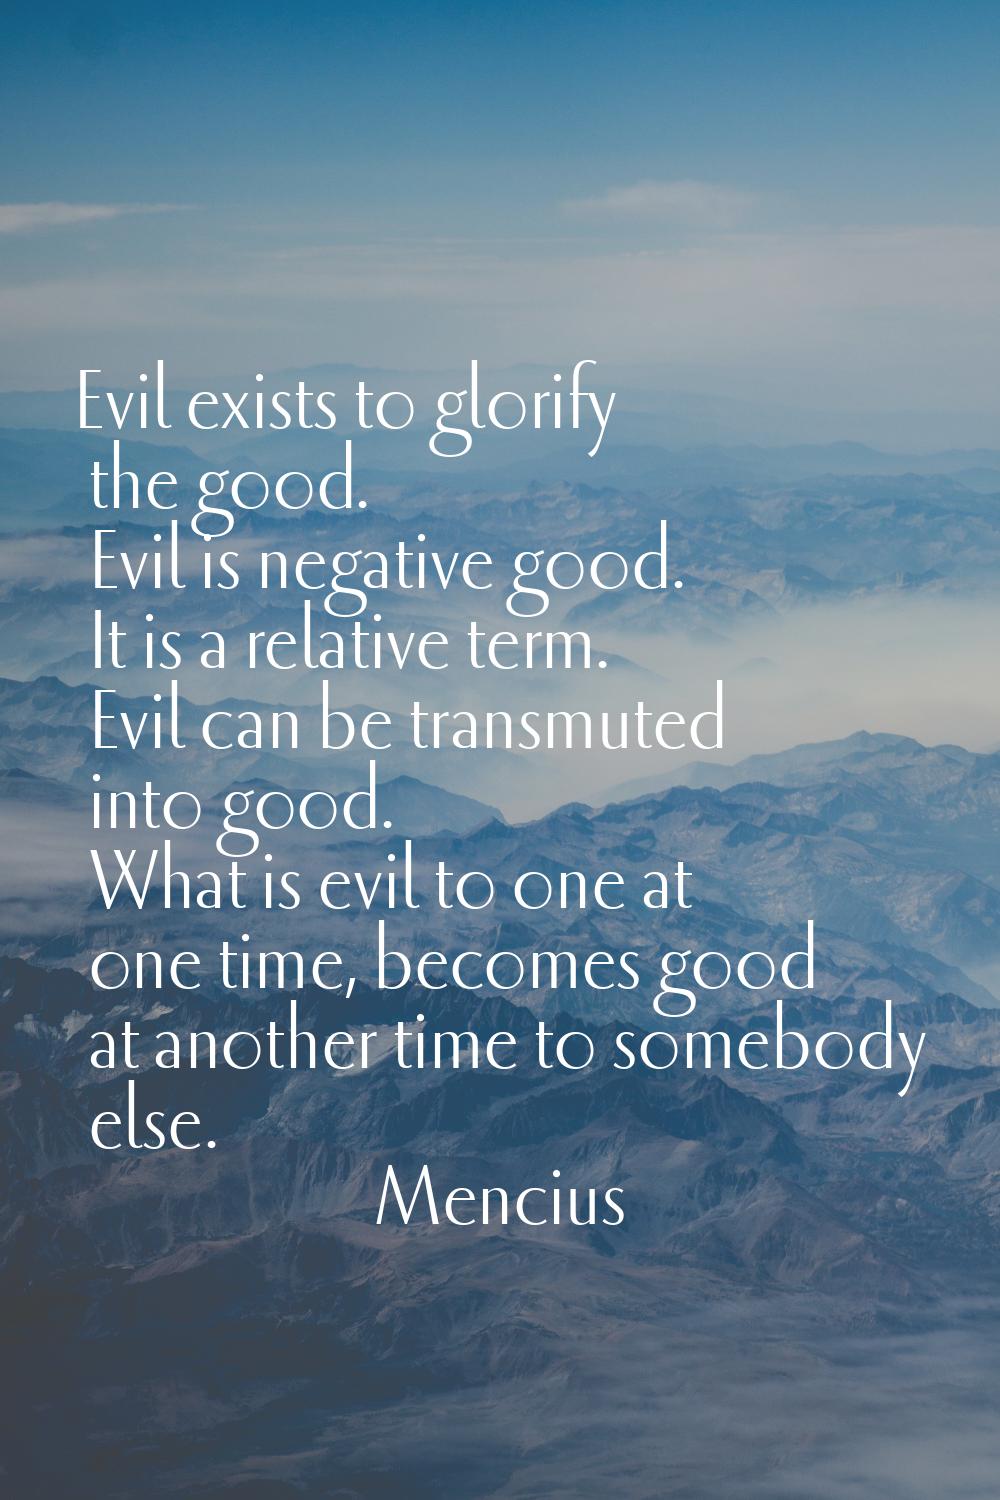 Evil exists to glorify the good. Evil is negative good. It is a relative term. Evil can be transmut